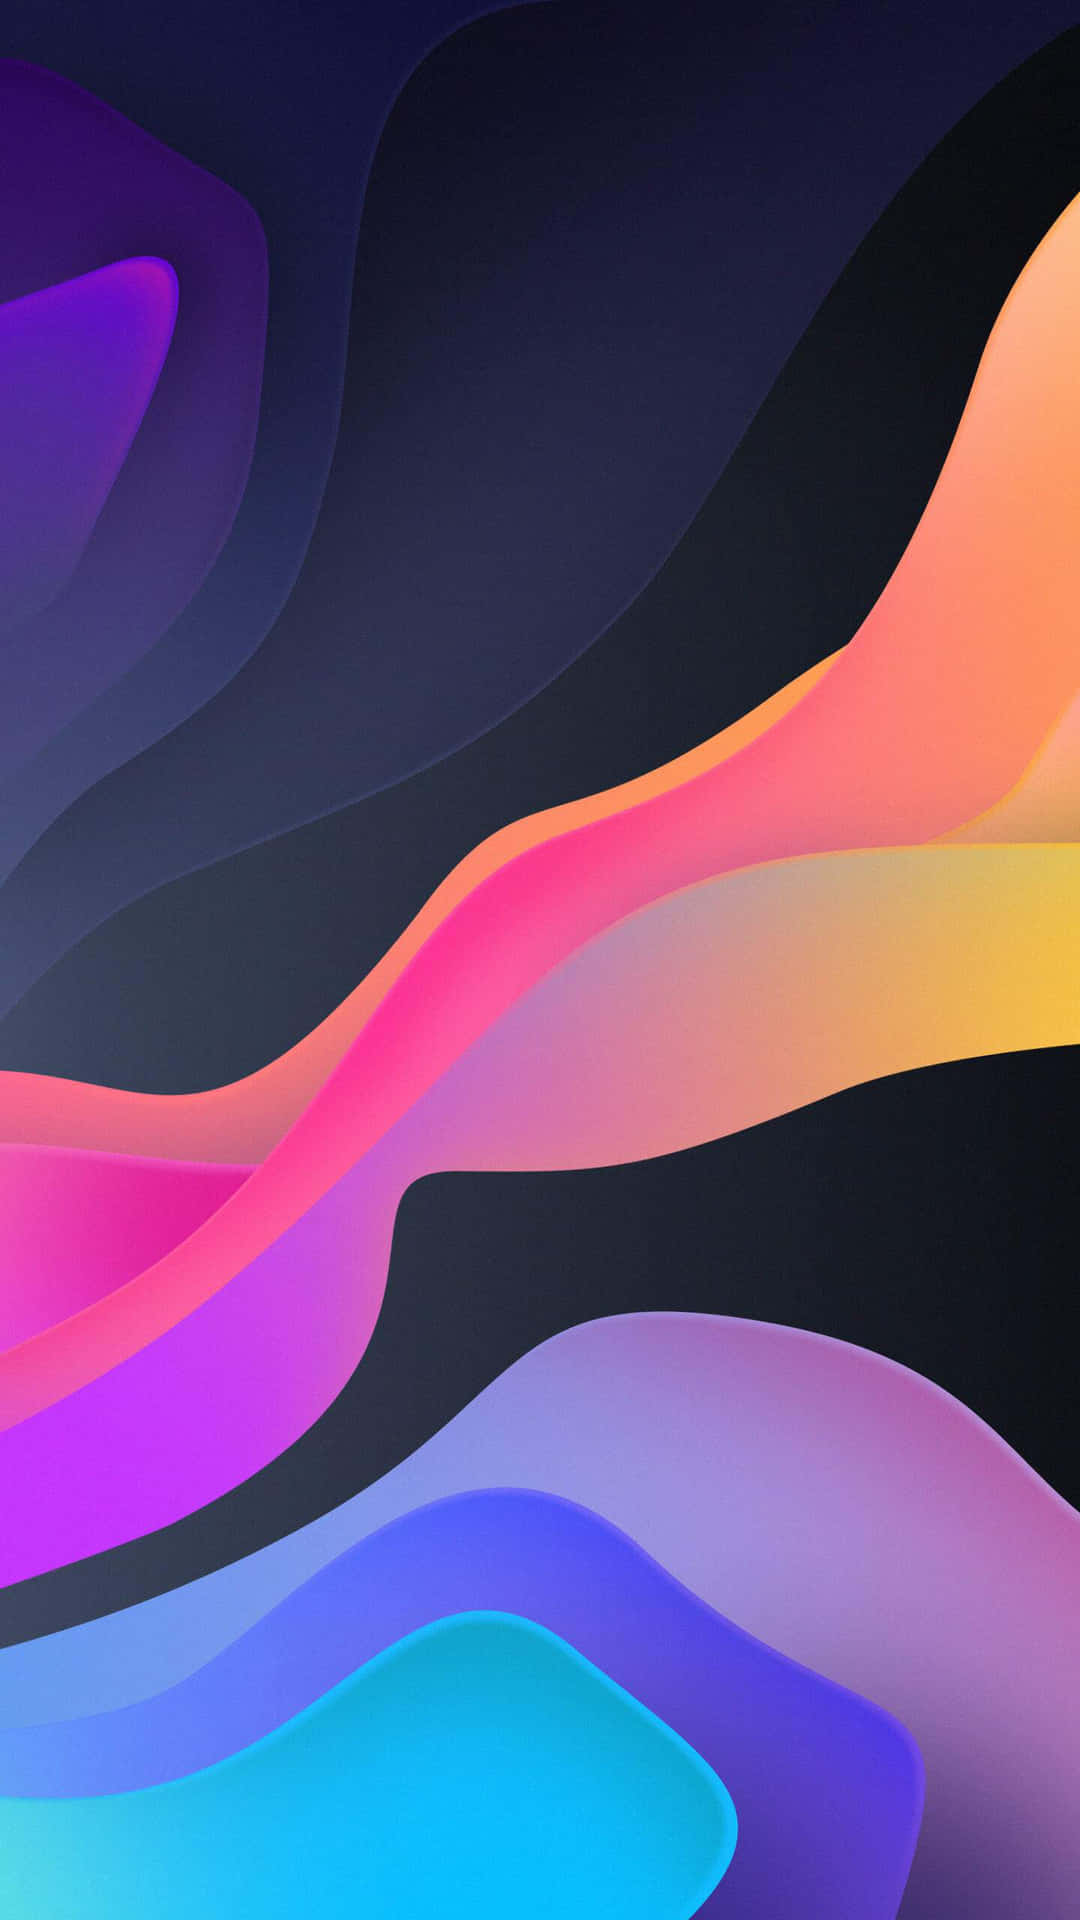 A Colorful Abstract Background With A Rainbow Of Colors Background